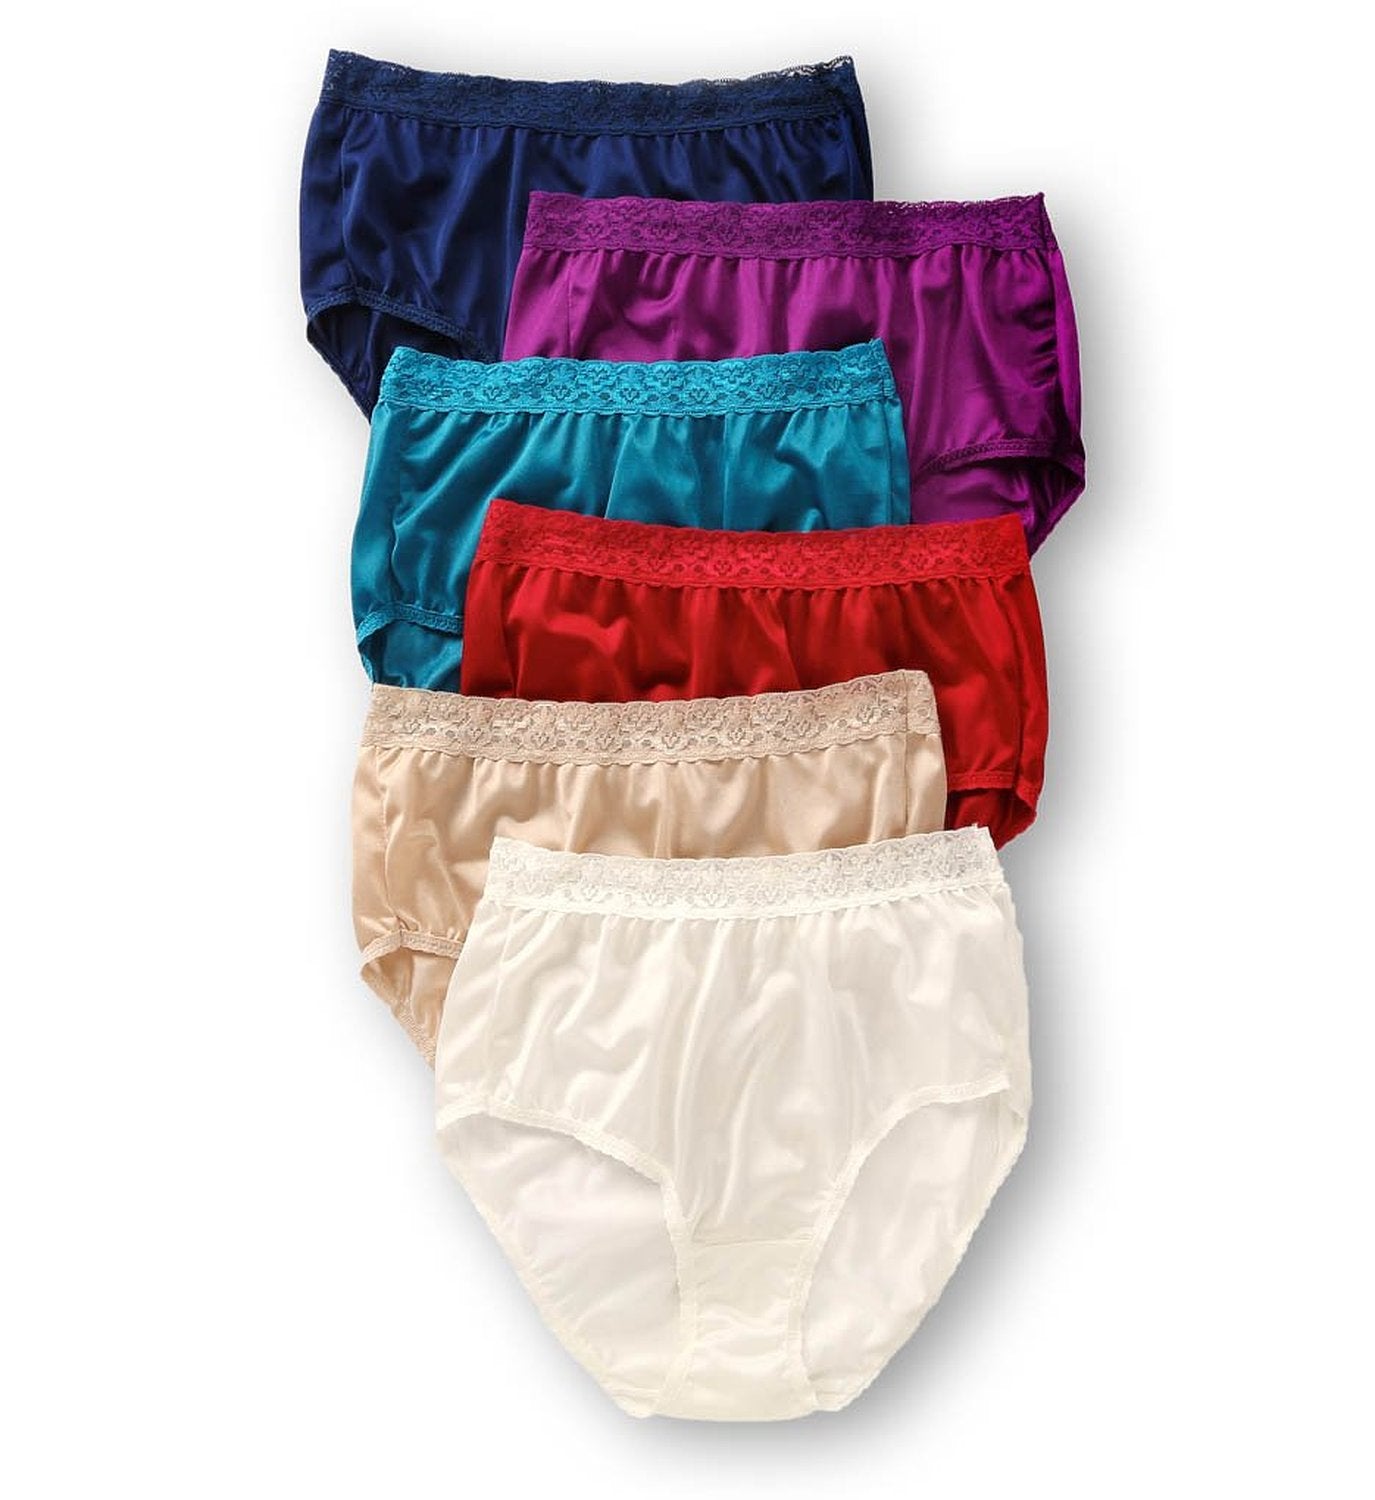 Women's Fruit of the Loom® 6-Pack Signature Cotton Brief Panty Set